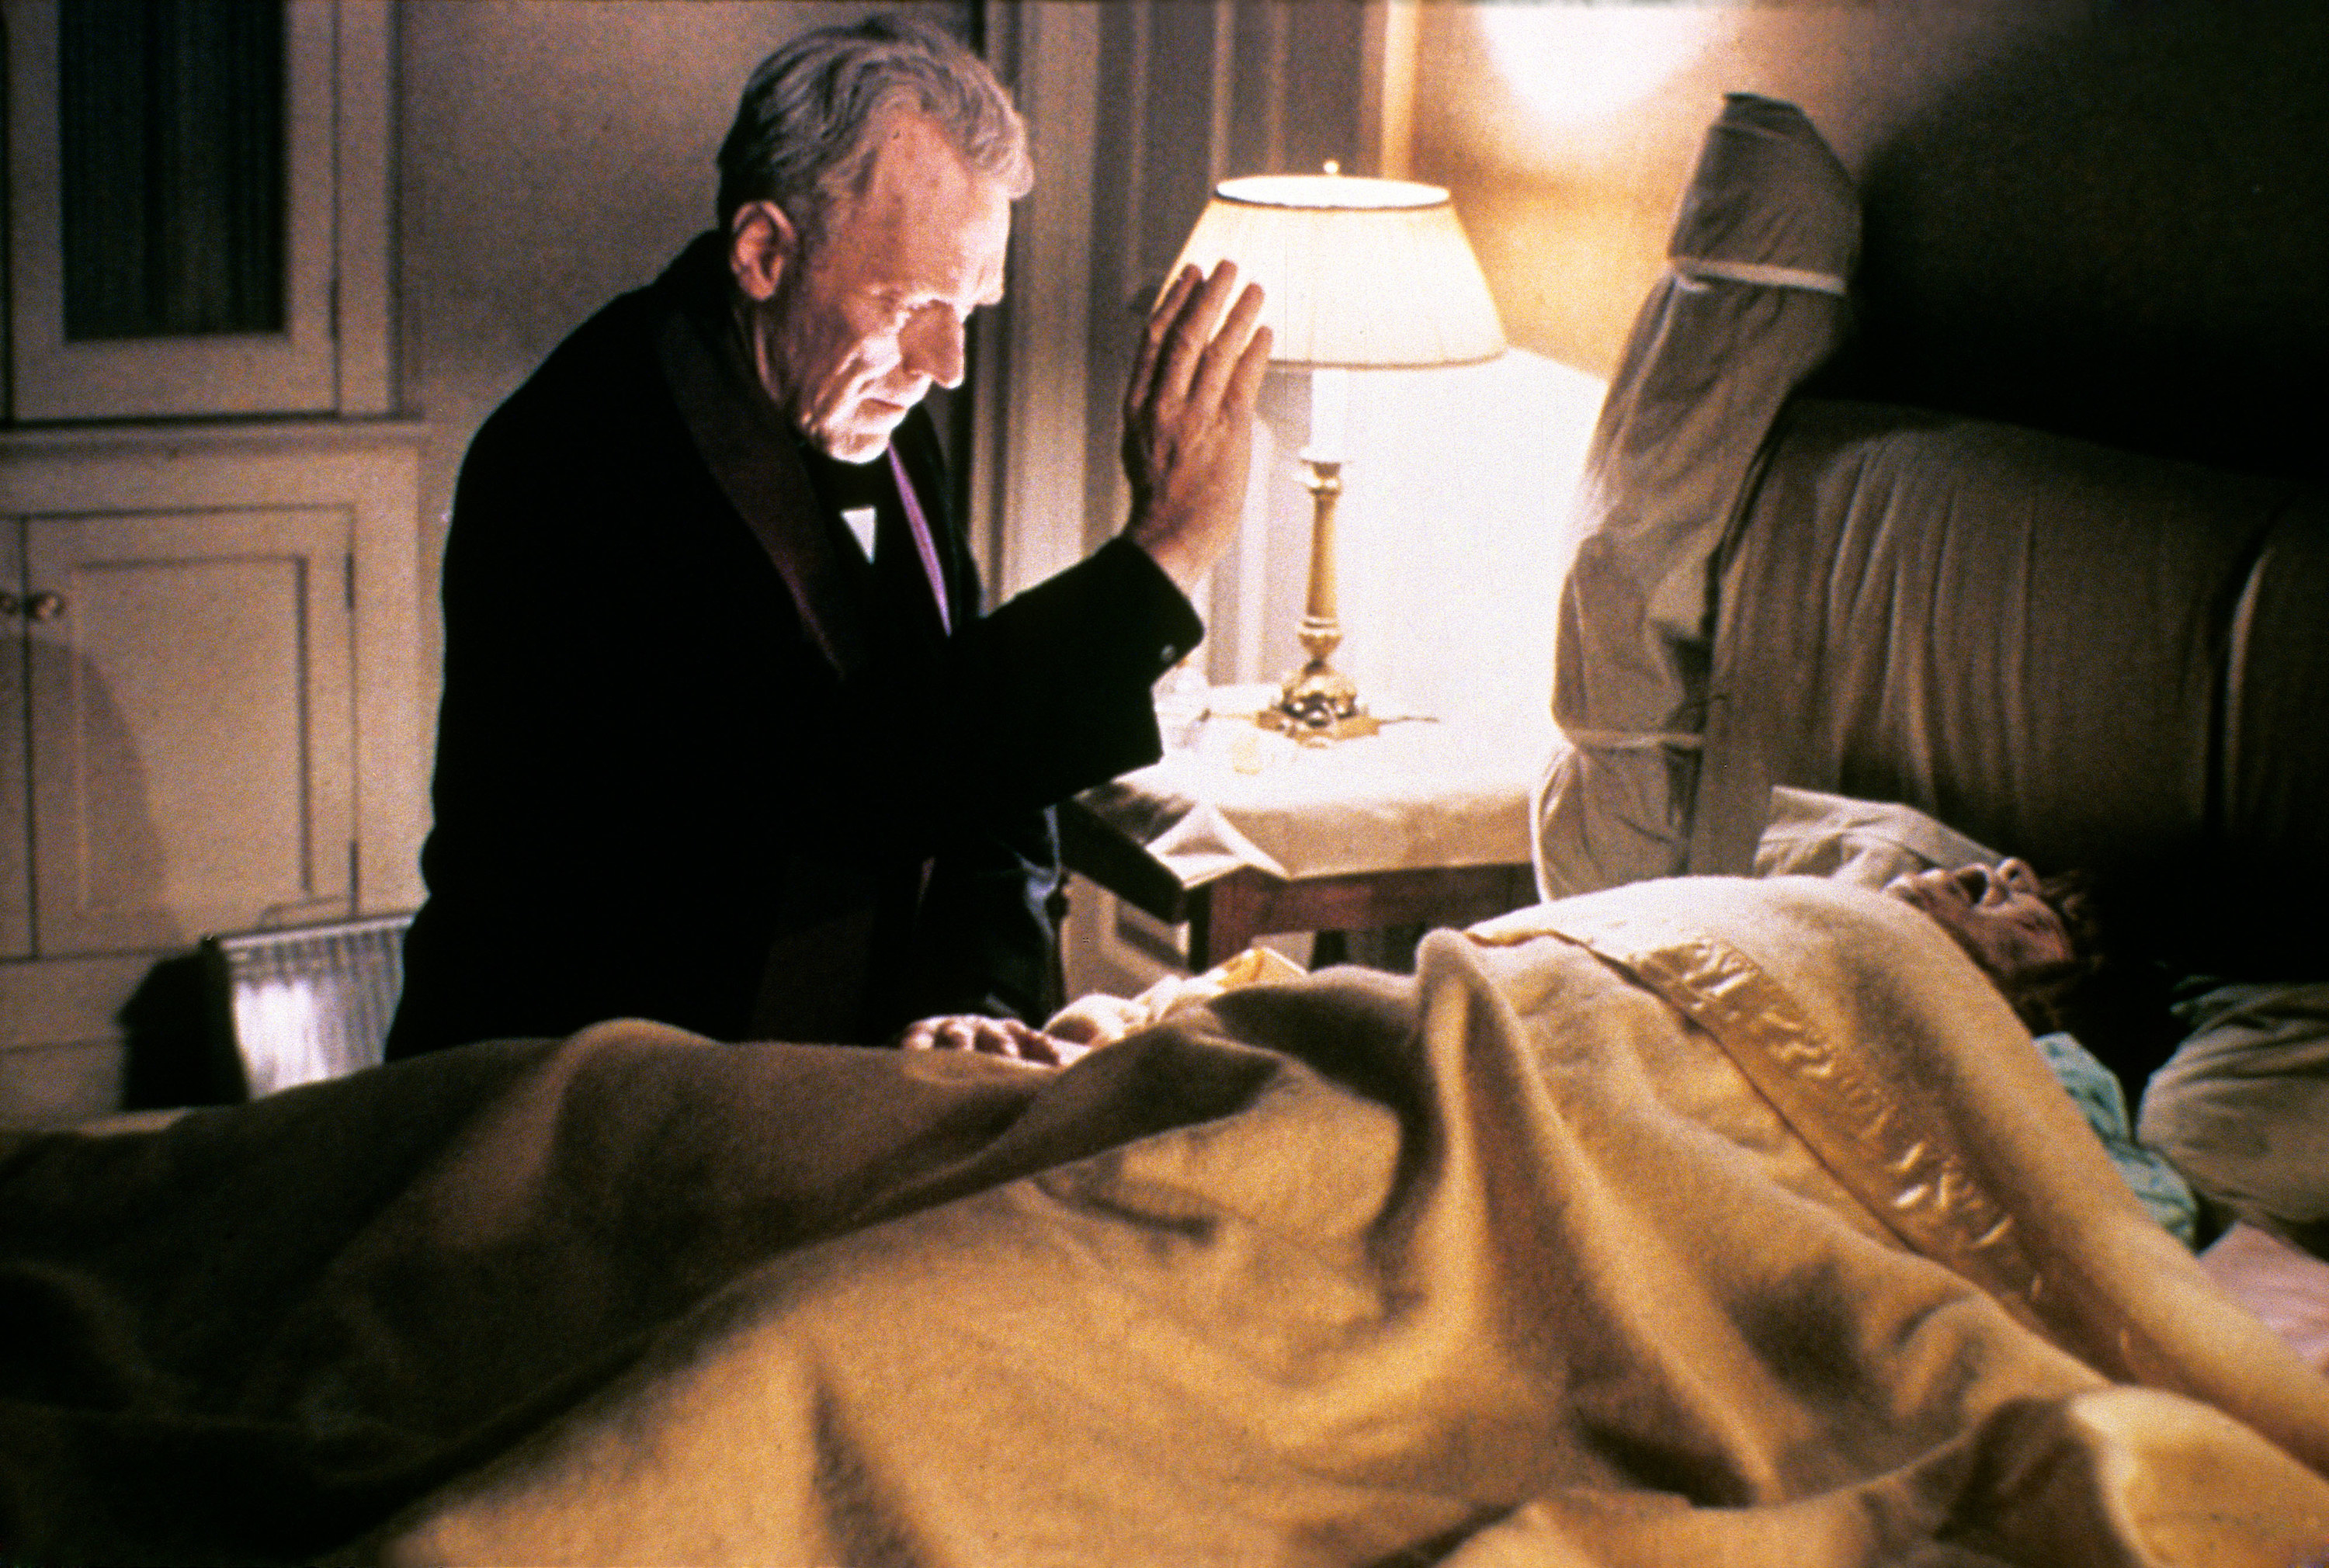 priest praying over a person in bed